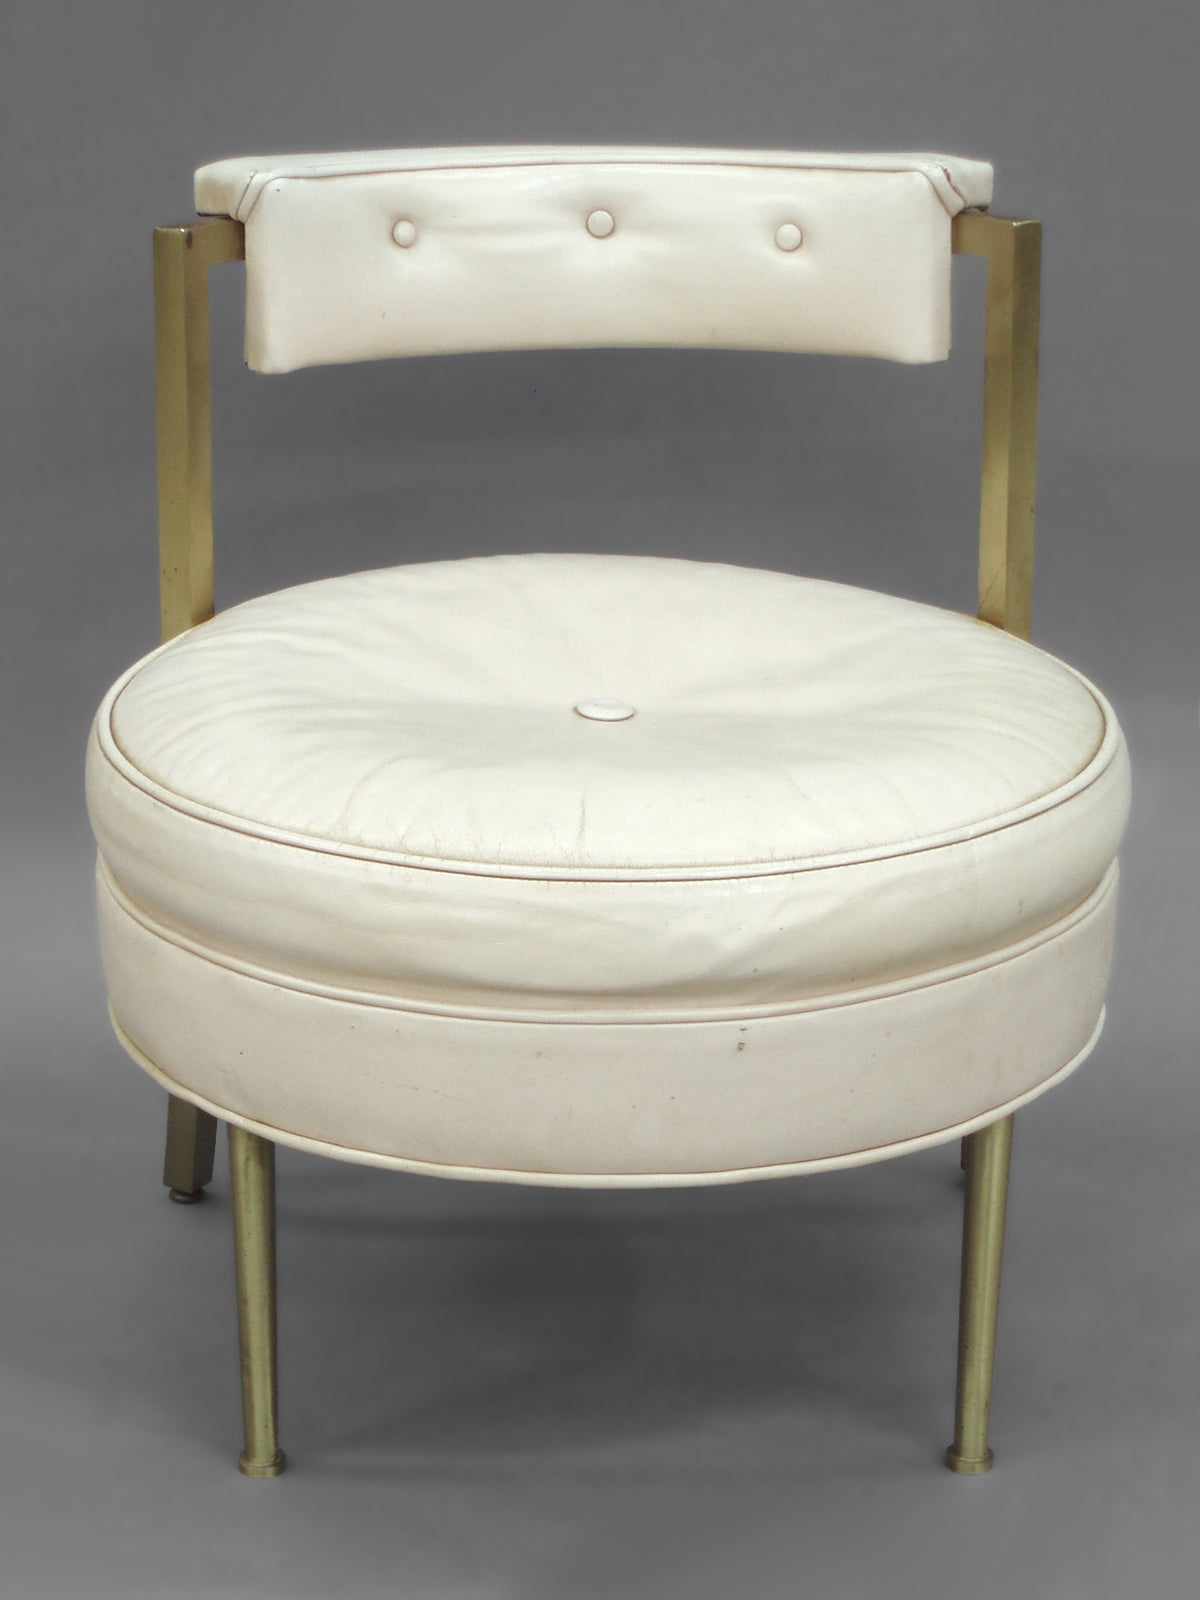 Leather with Brass Leg Vanity or Boudoir Stool